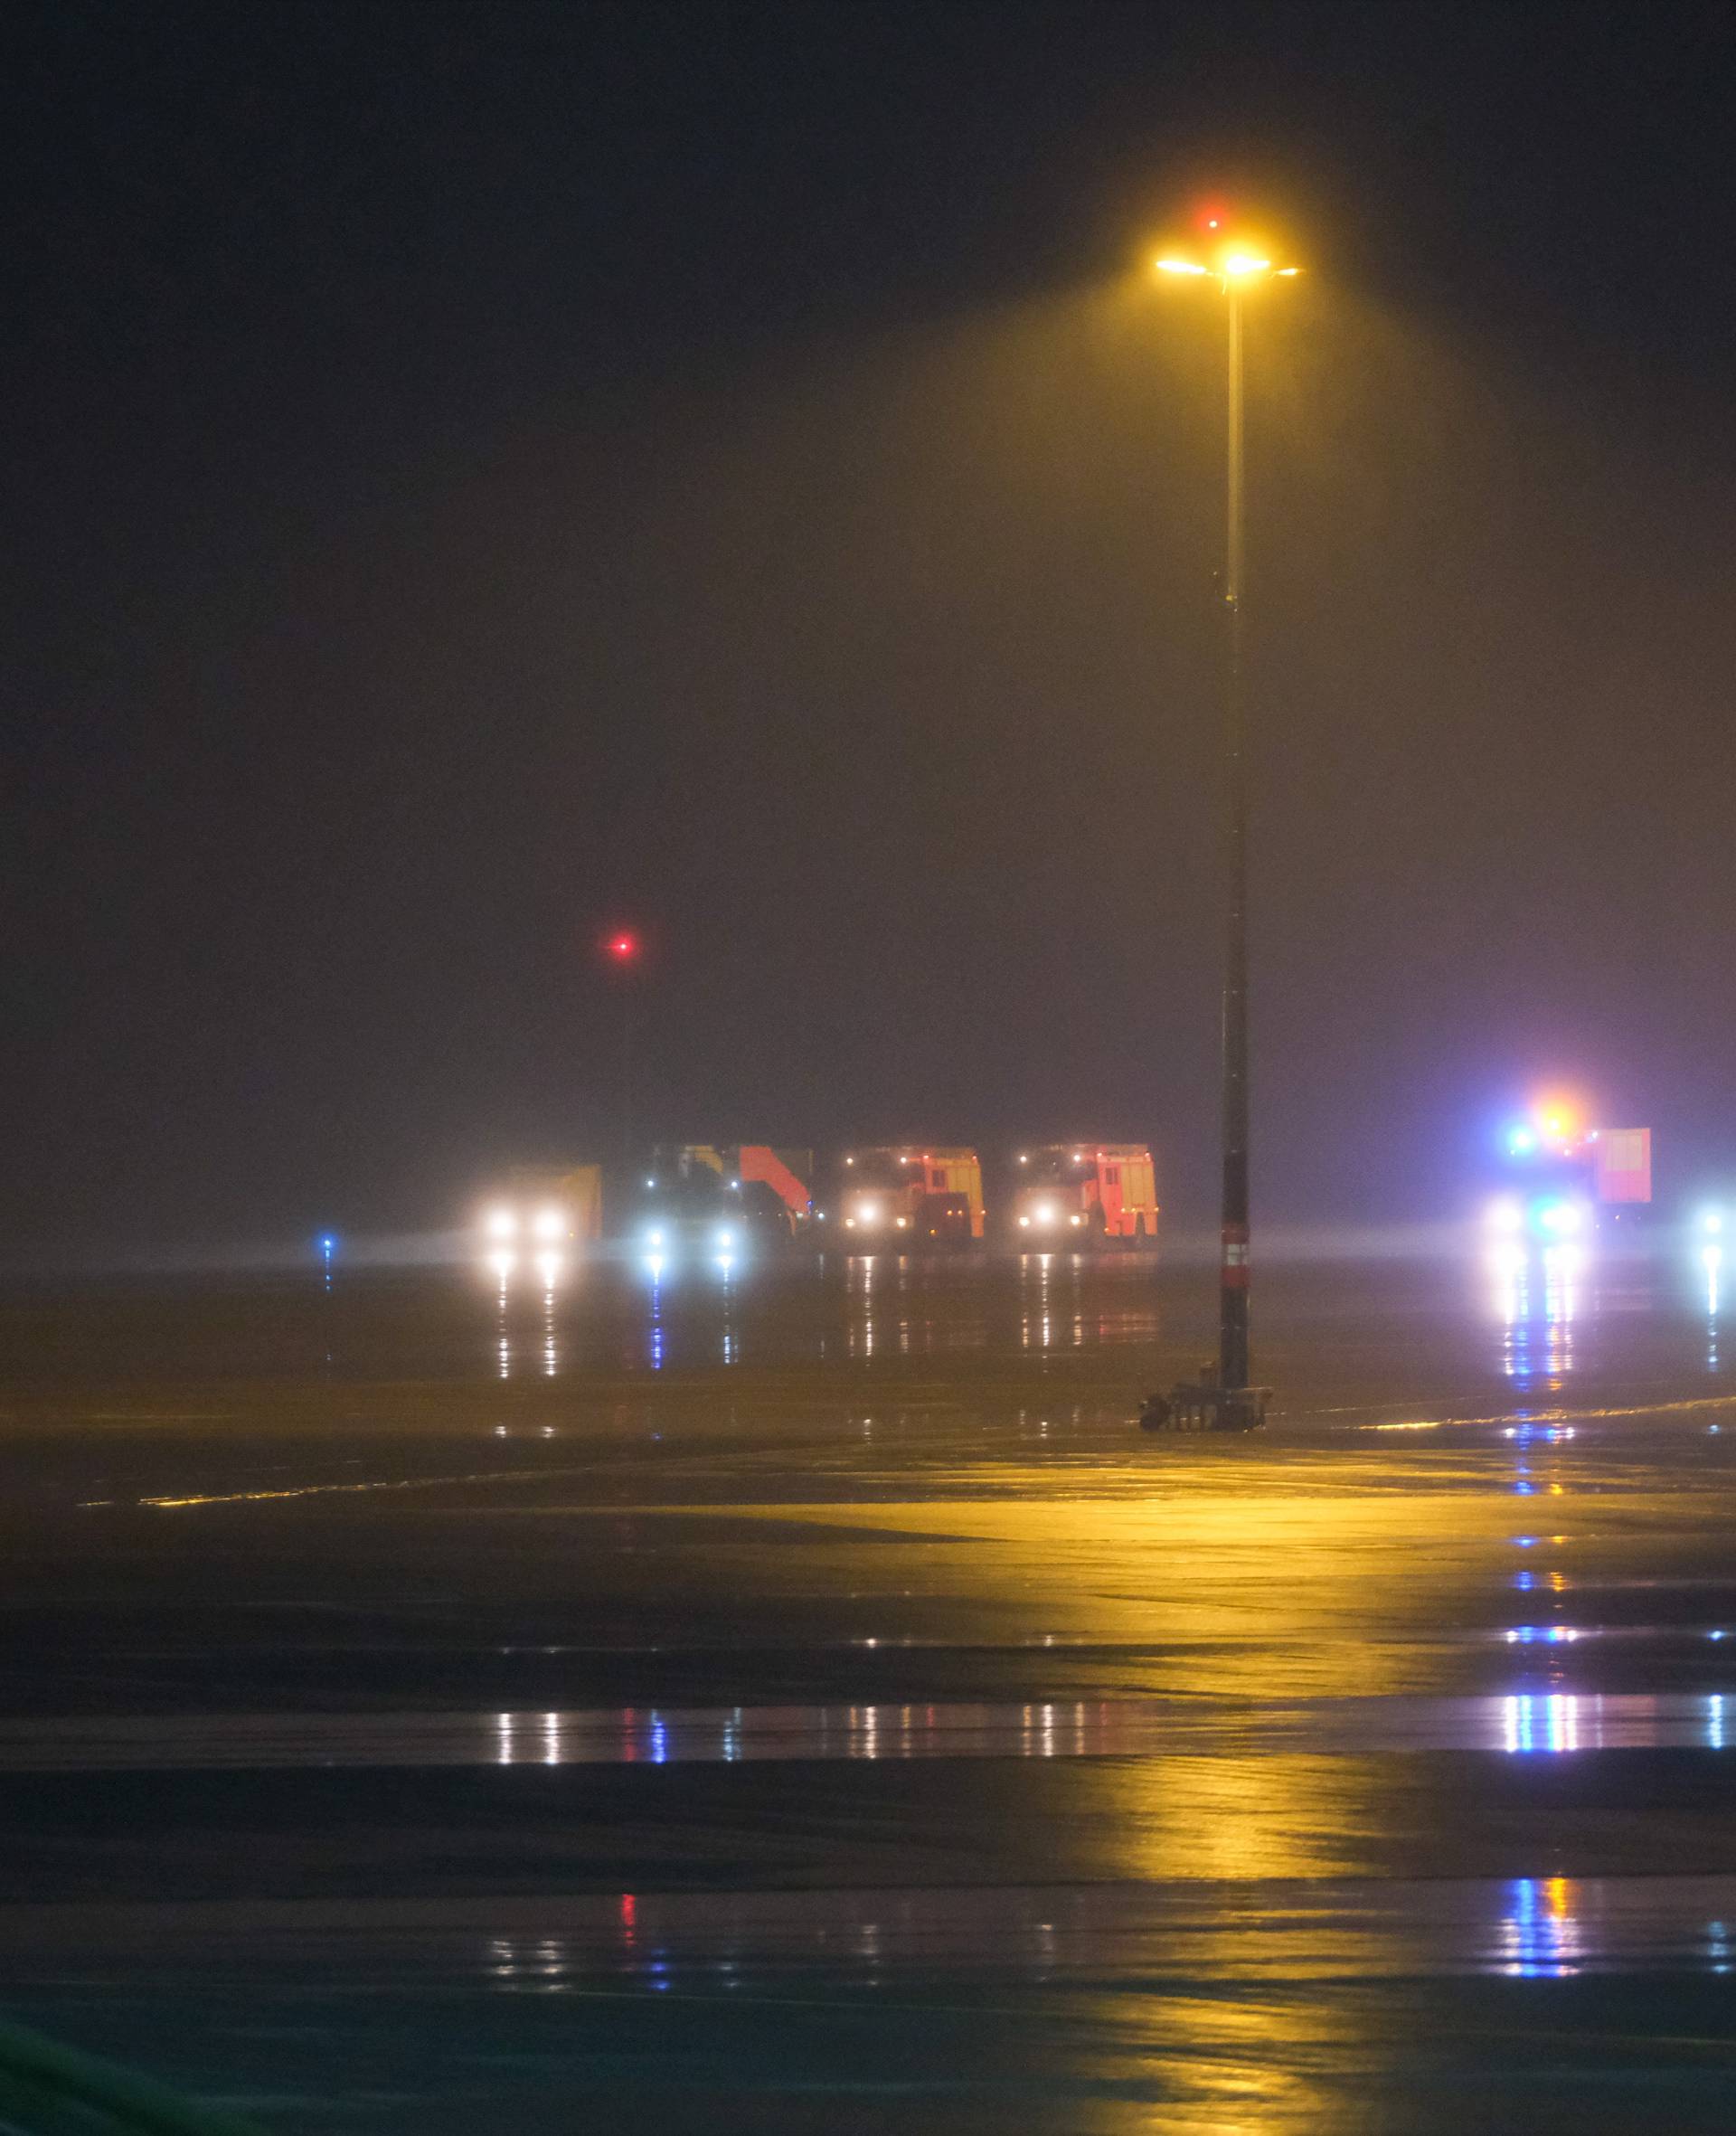 Air traffic at Hannover Airport discontinued after incident